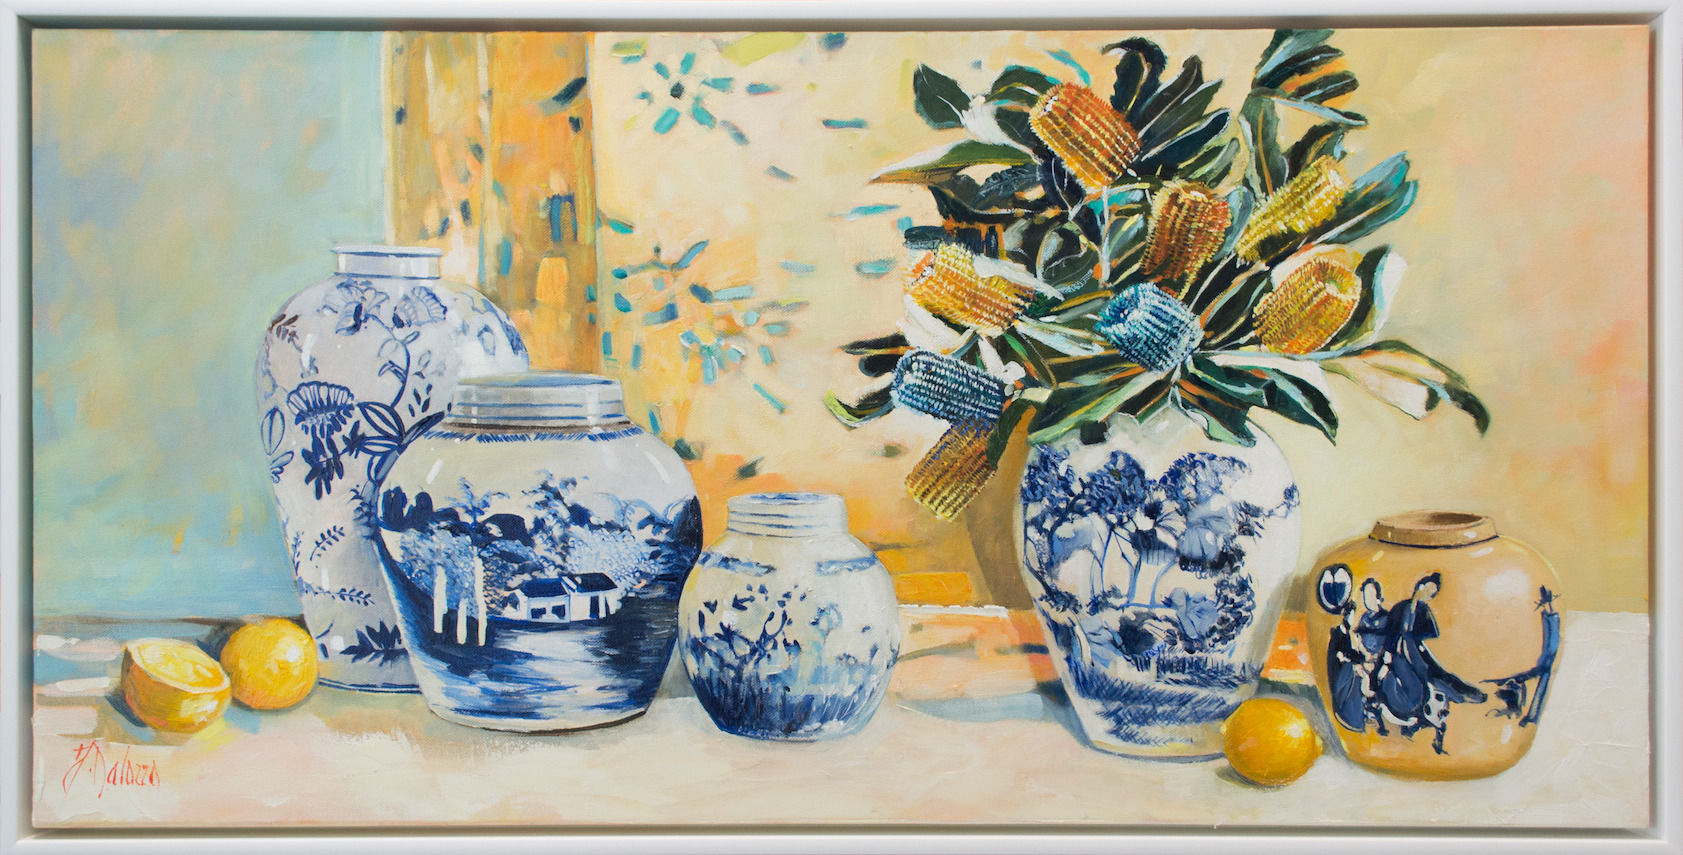 Framed Front View Of Still Life Painting "Banksia with China Vases" By Judith Dalozzo